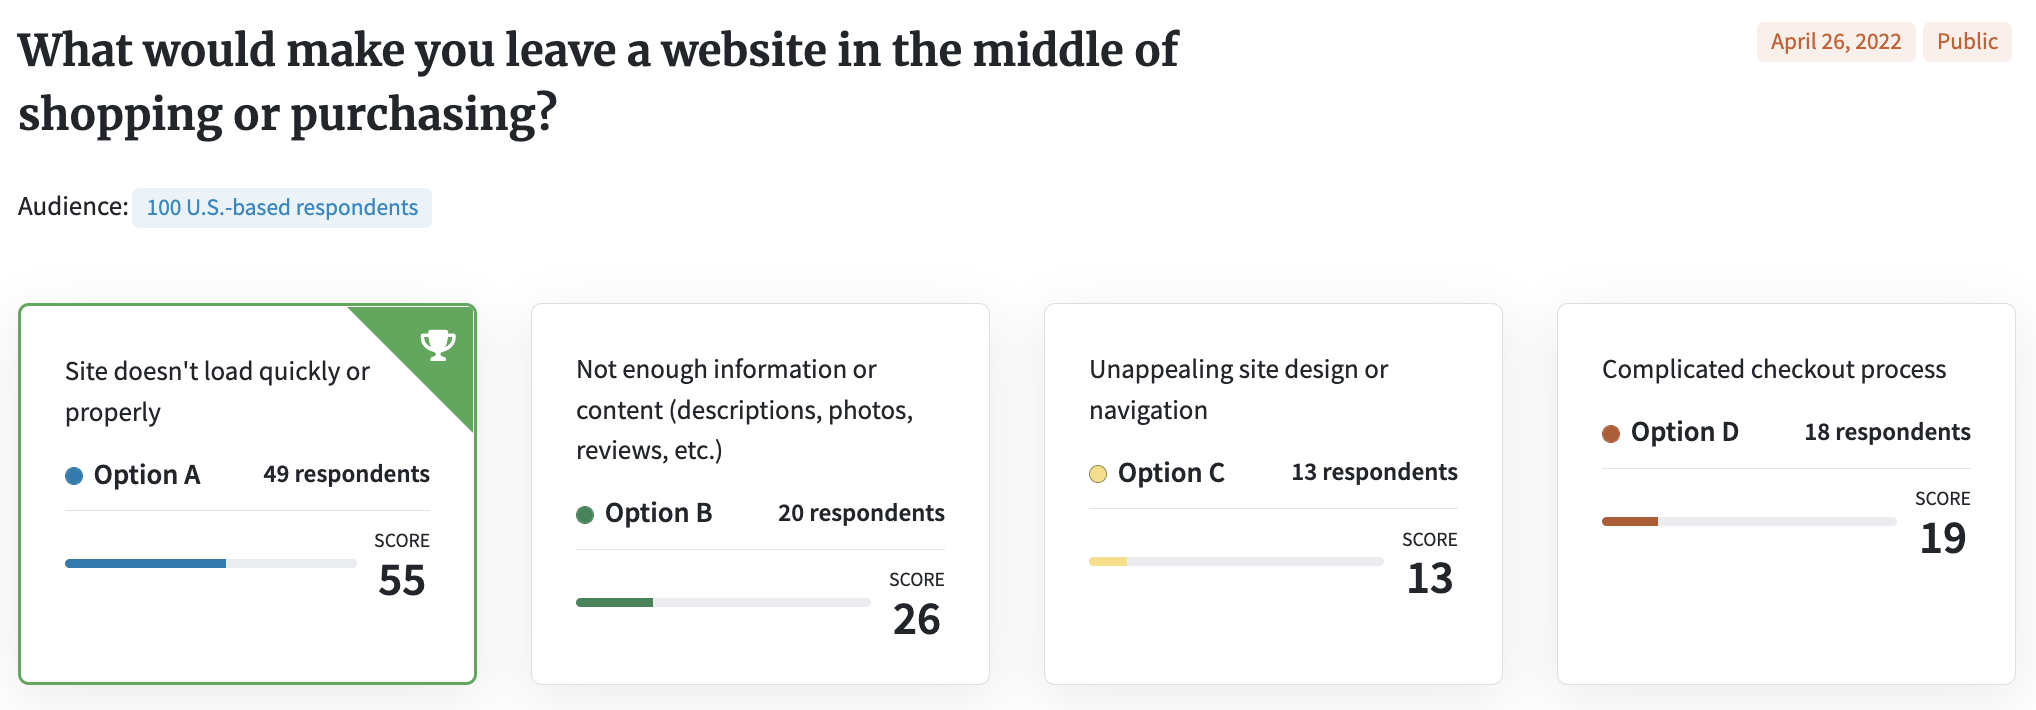 Screenshot of poll asking what would make a shopper leave a website in the middle of shopping or purchasing